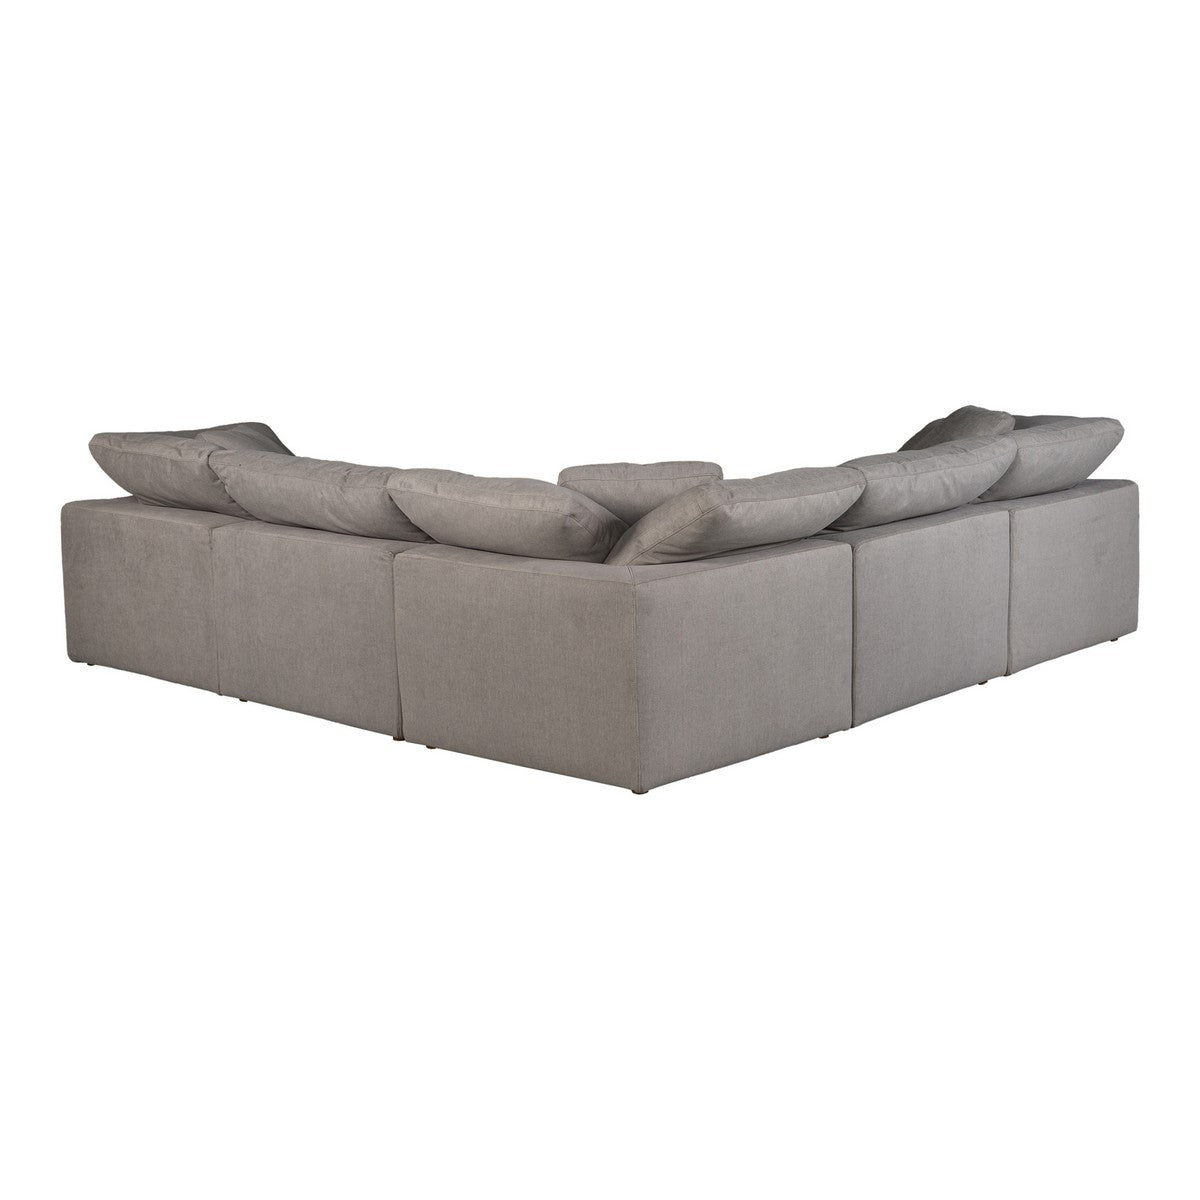 Moe's Home Collection Clay Classic L Modular Sectional Livesmart Fabric Light Grey - YJ-1010-29